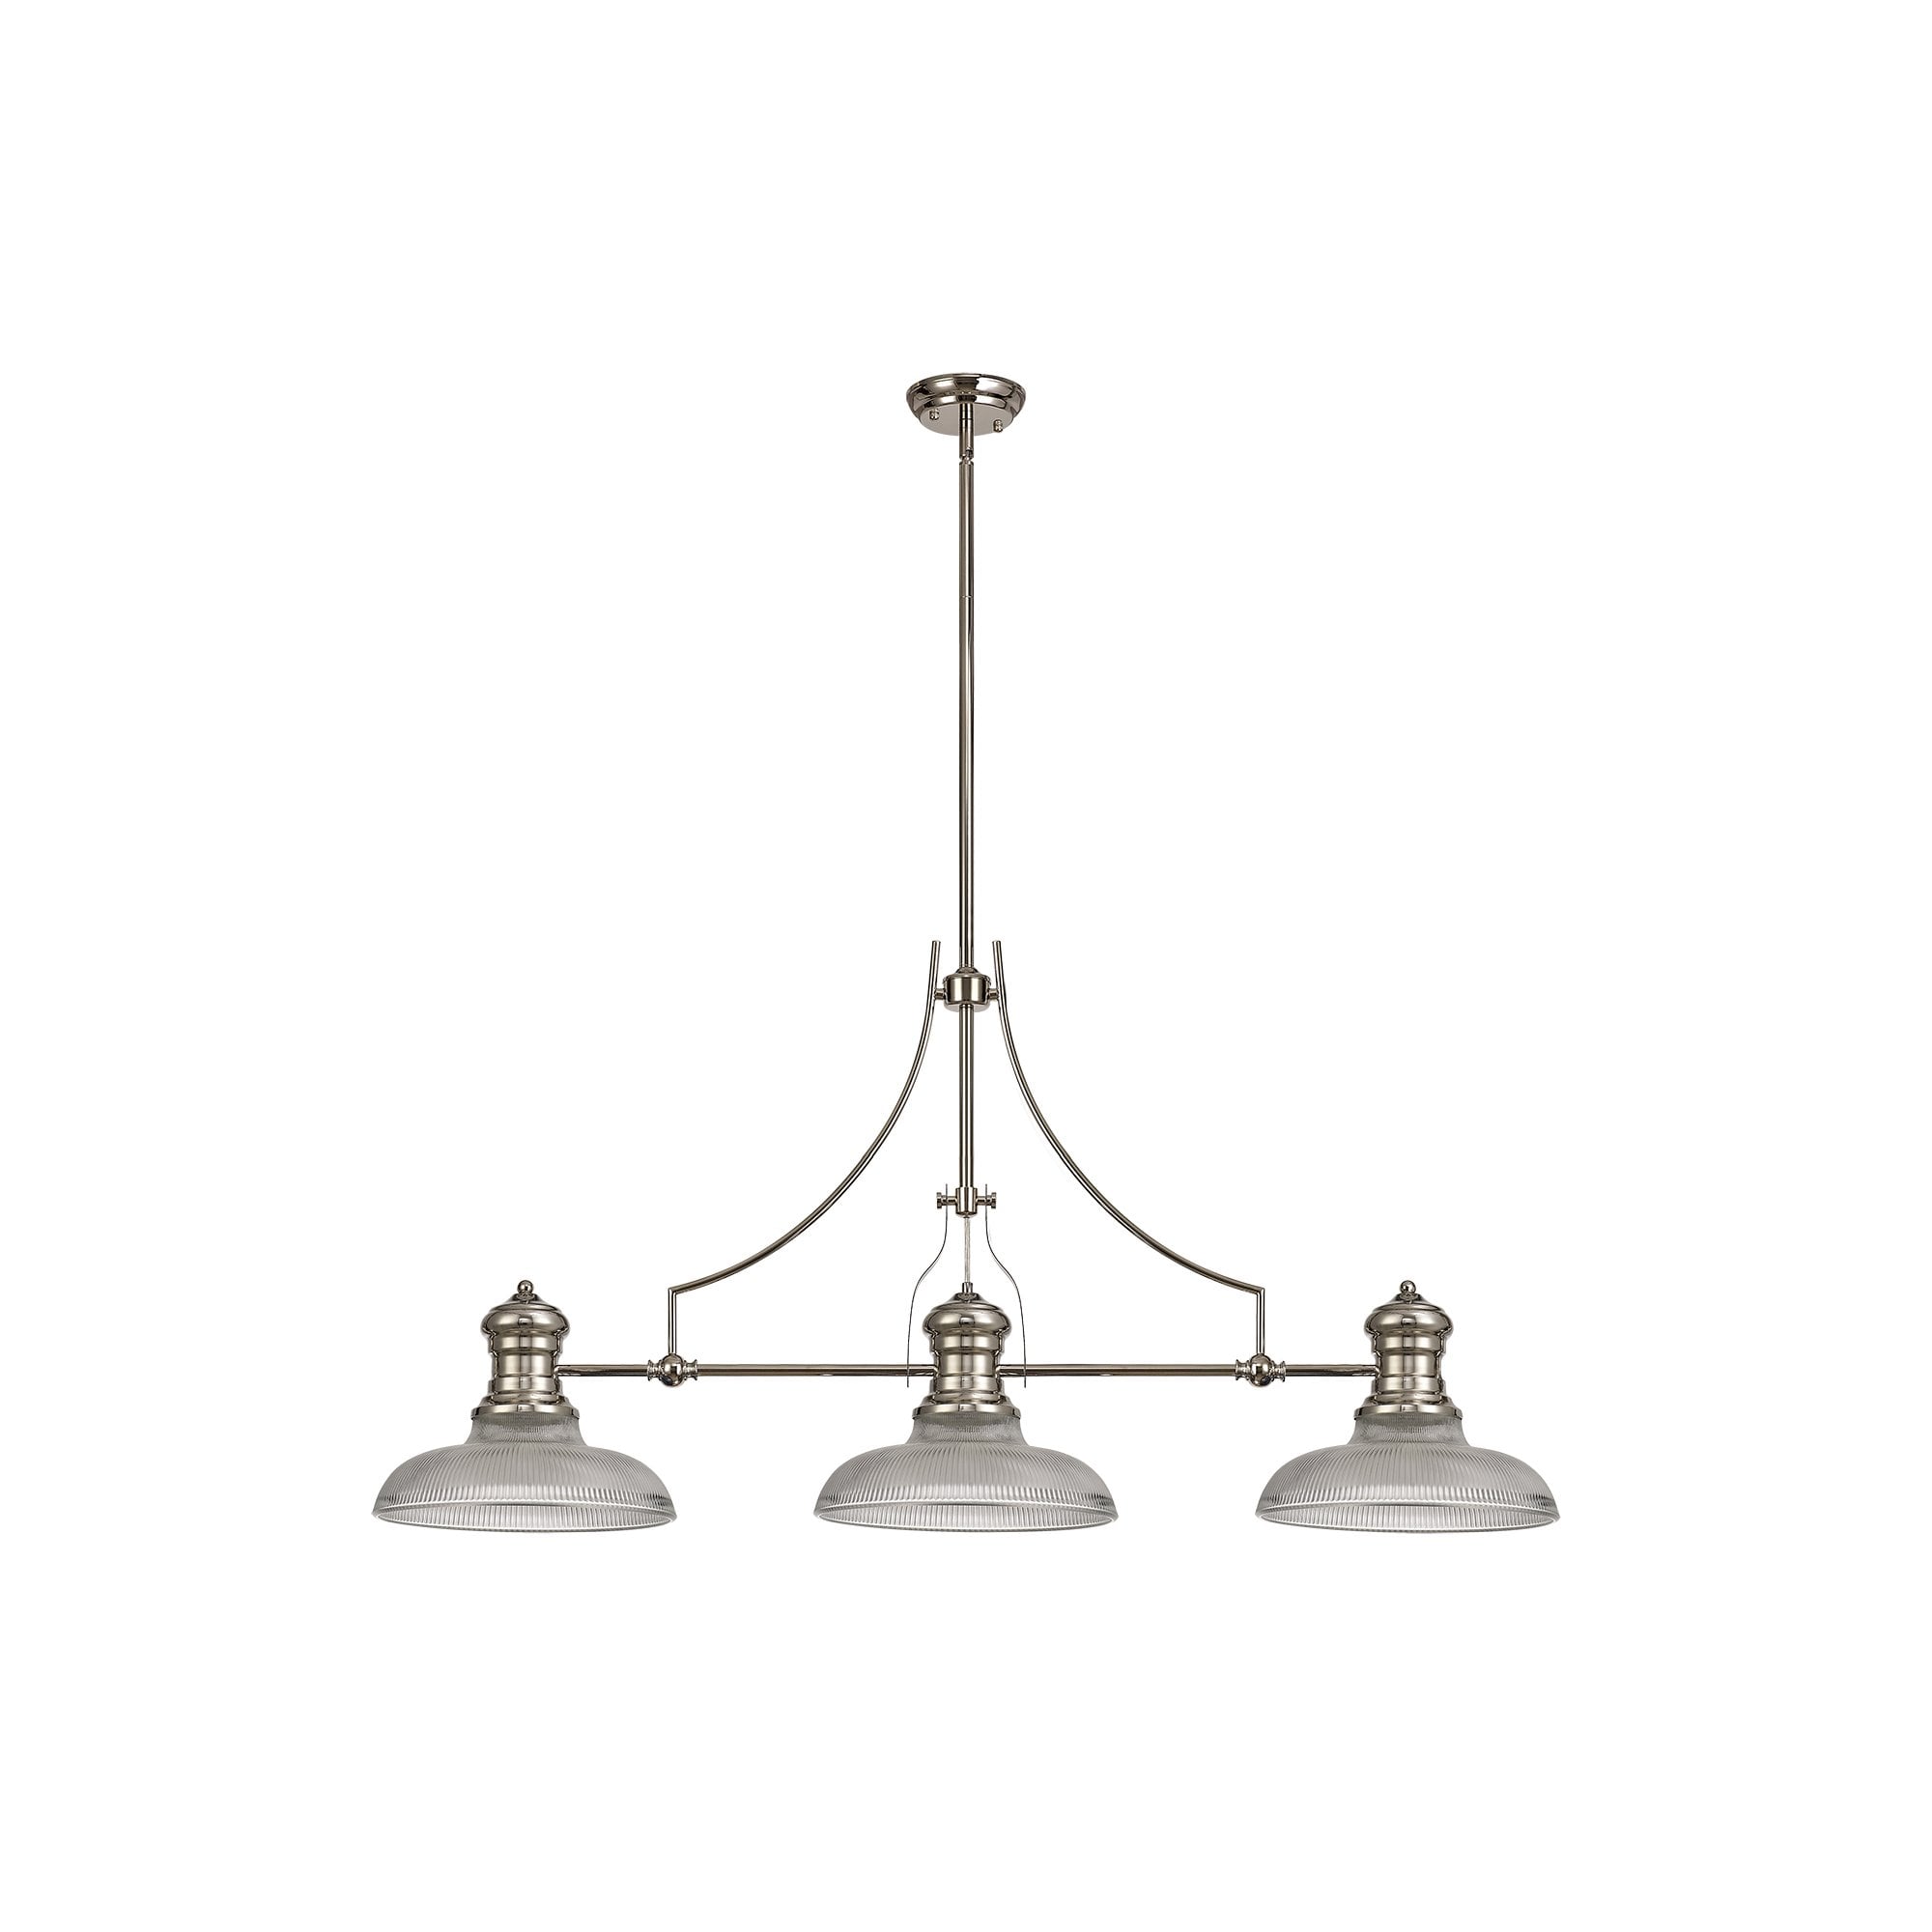 3 Light Telescopic Pendant E27 With 30cm Round Glass Shade, Polished Nickel/Clear